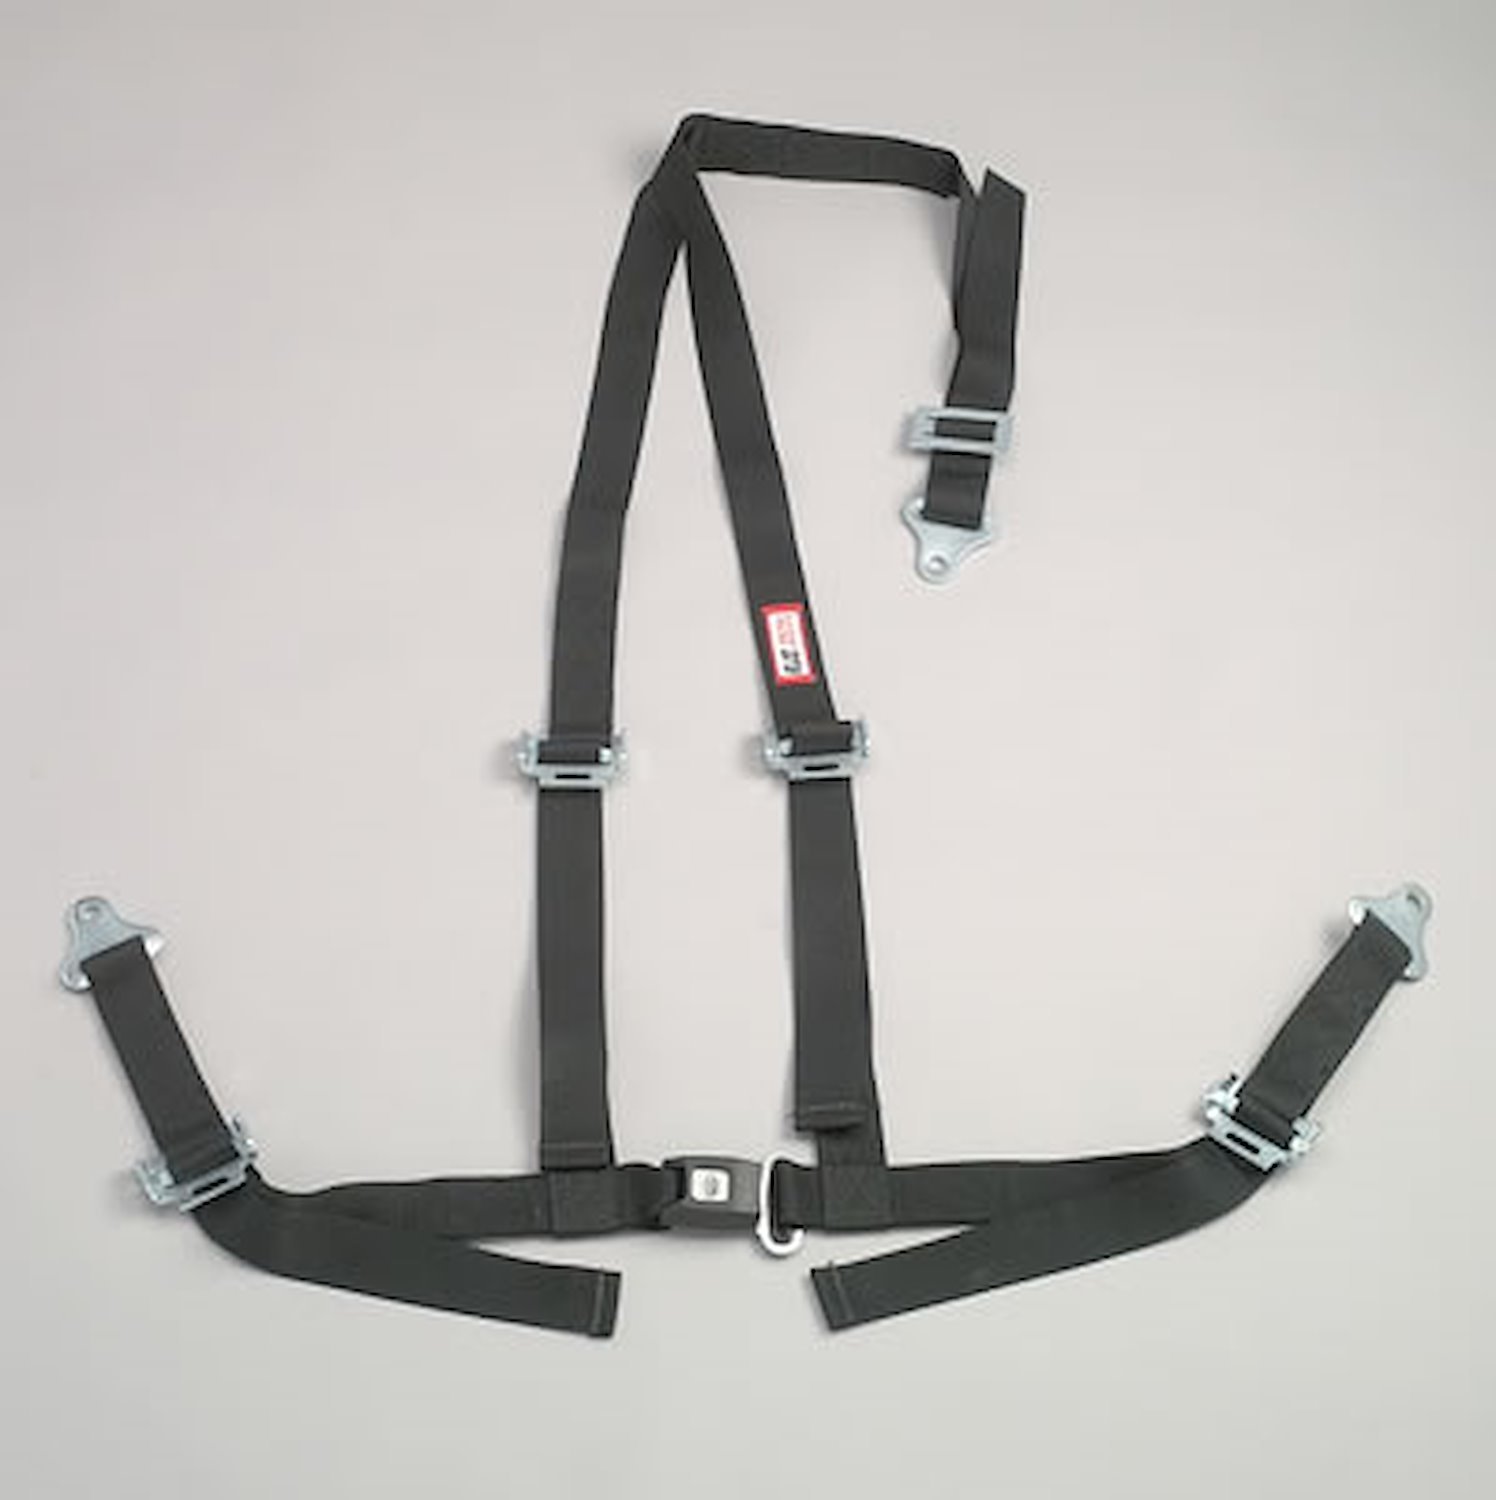 NON-SFI B&T HARNESS 2 PULL DOWN Lap Belt 2 S. H. Y FLOOR Mount ALL WRAP ENDS w/STERNUM STRAP GRAY